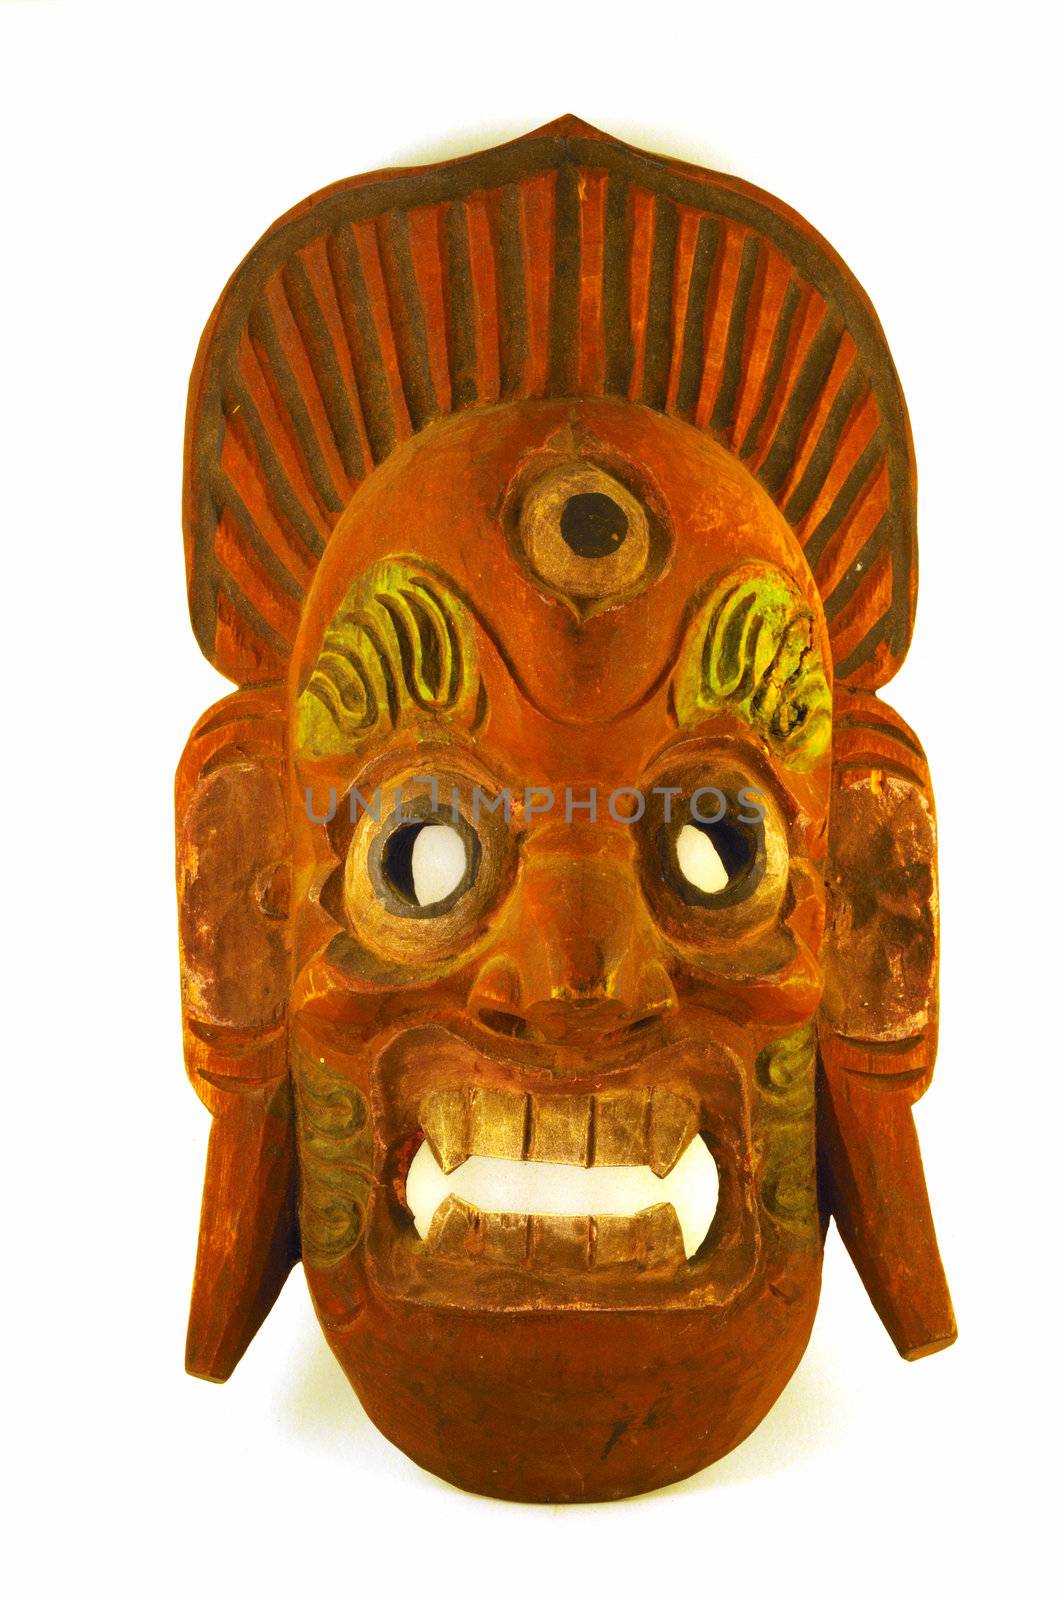 A wooden mask painted brick red and sage green, with fierce teeth and a third eye.  A crown surmounts the grimacing face.